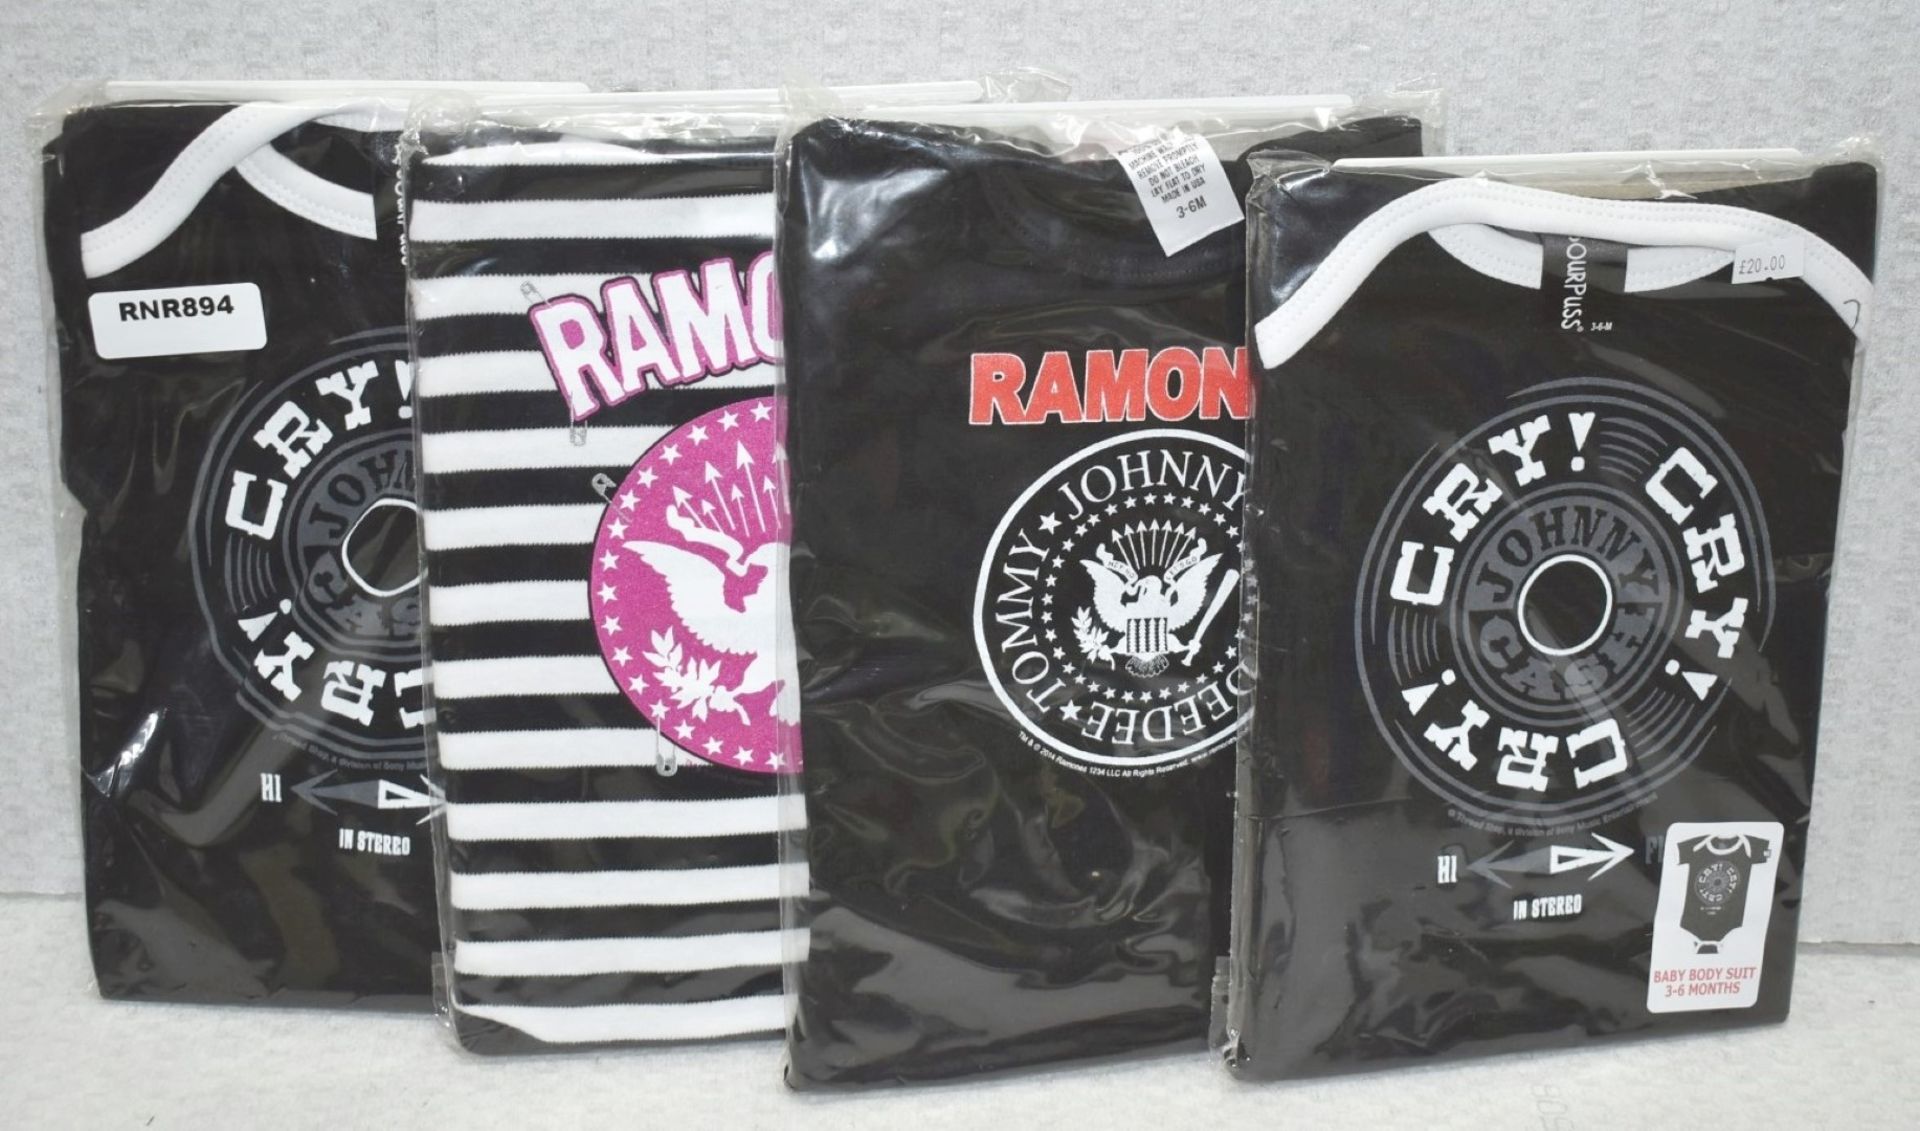 4 x Assorted Baby Body Suits - Features Johnny Cash and the Ramones - Size: 3 to 6 Months - - Image 8 of 8